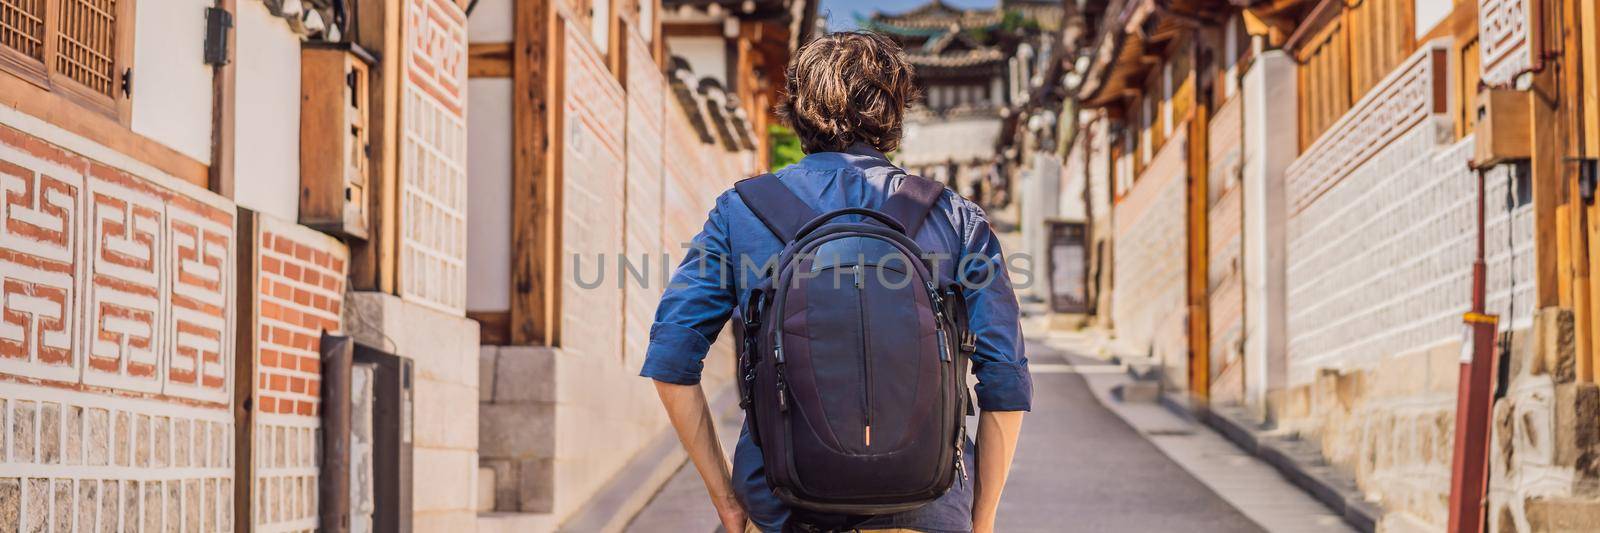 Young man tourist in Bukchon Hanok Village is one of the famous place for Korean traditional houses have been preserved. Travel to Korea Concept BANNER, LONG FORMAT by galitskaya